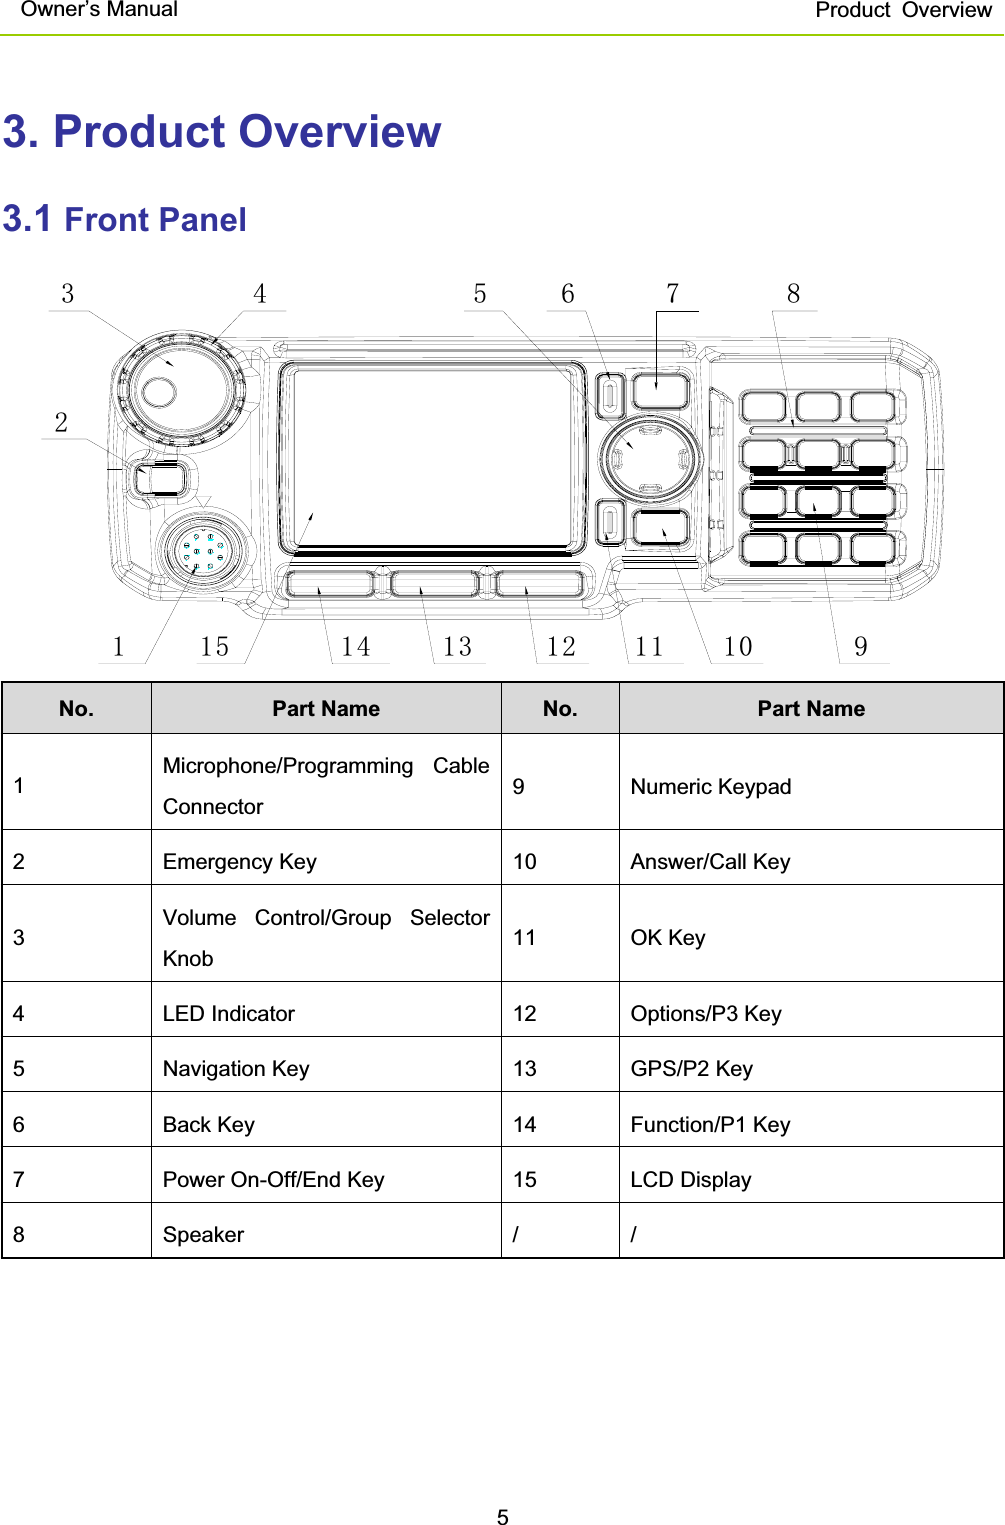 Owner’s Manual  Product Overview53. Product Overview 3.1 Front Panel       No. Part Name  No. Part Name 1Microphone/Programming Cable Connector 9 Numeric Keypad 2 Emergency Key  10 Answer/Call Key 3Volume Control/Group Selector Knob 11 OK Key 4 LED Indicator  12 Options/P3 Key  5  Navigation Key  13  GPS/P2 Key 6  Back Key  14  Function/P1 Key 7  Power On-Off/End Key  15  LCD Display 8 Speaker  / / 